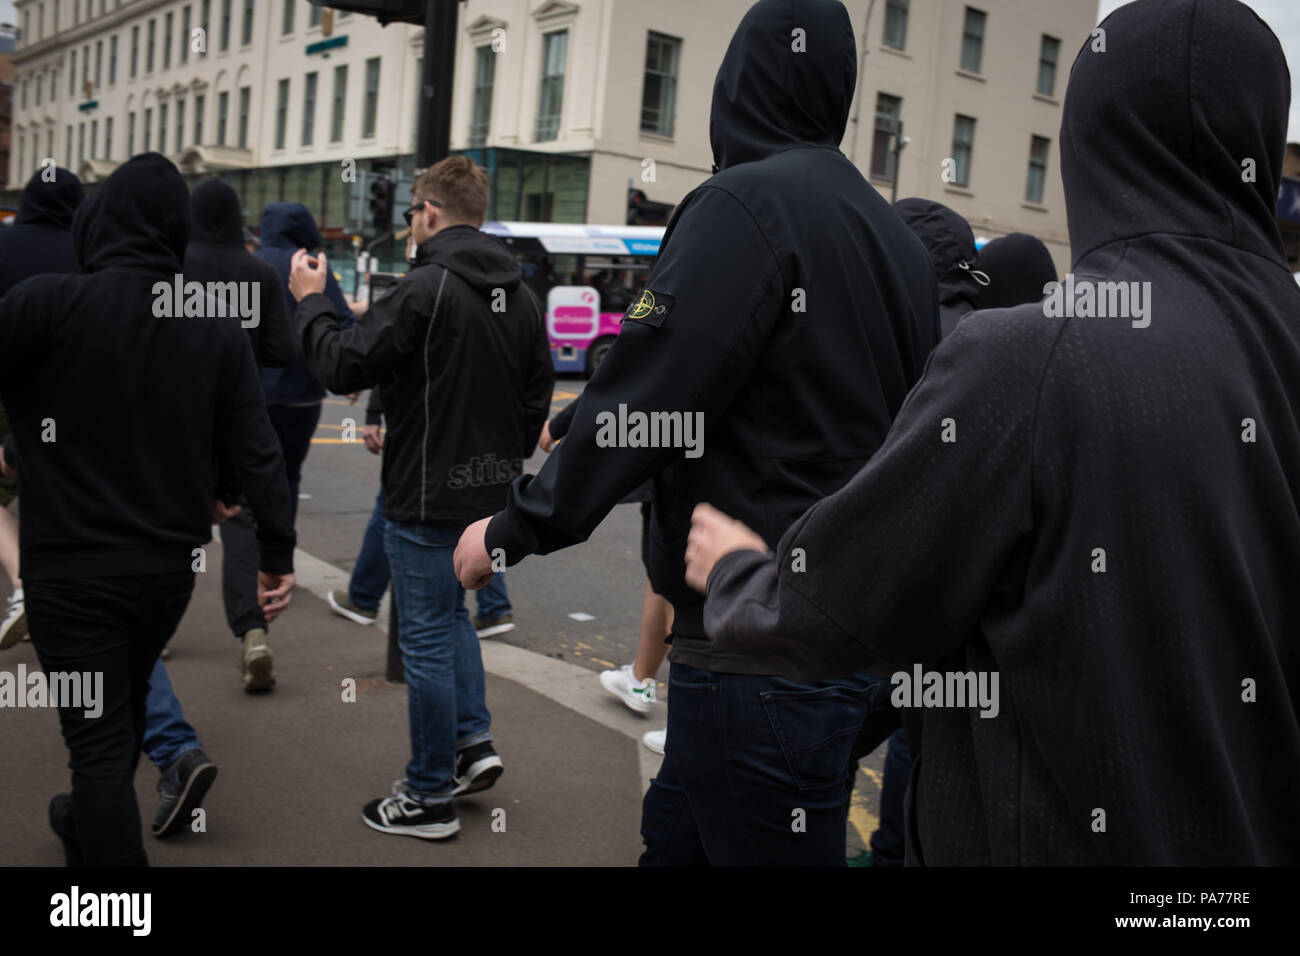 Glasgow, Scotland, on 21 July 2018. A demonstration by anarchists, during a protest by the far right Scottish Defence League, in George Square, Glasgow, Scotland.  Mounted police and police with dogs separated the groups as the Scottish Defence League espoused their anti-immigrant rhetoric and accused immigrants of running grooming gangs. Image credit: Alamy News. Stock Photo